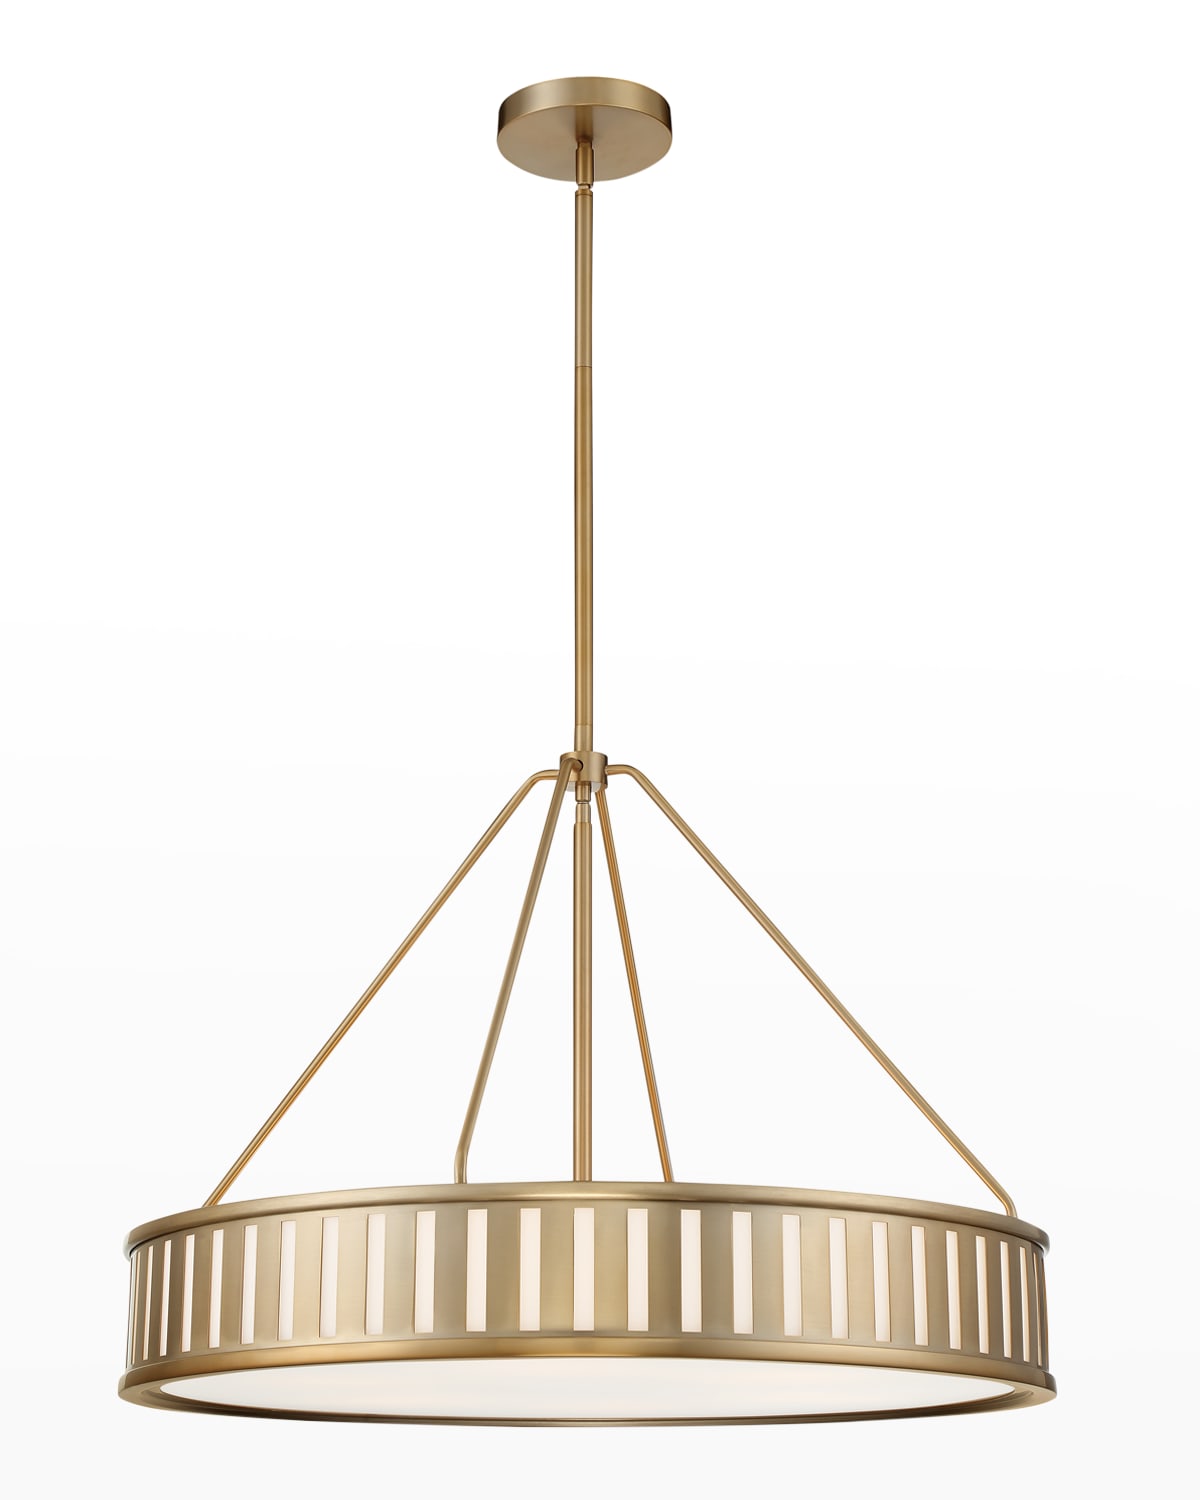 Crystorama Kendal 6-light Polished Nickel Pendant Light In Gold